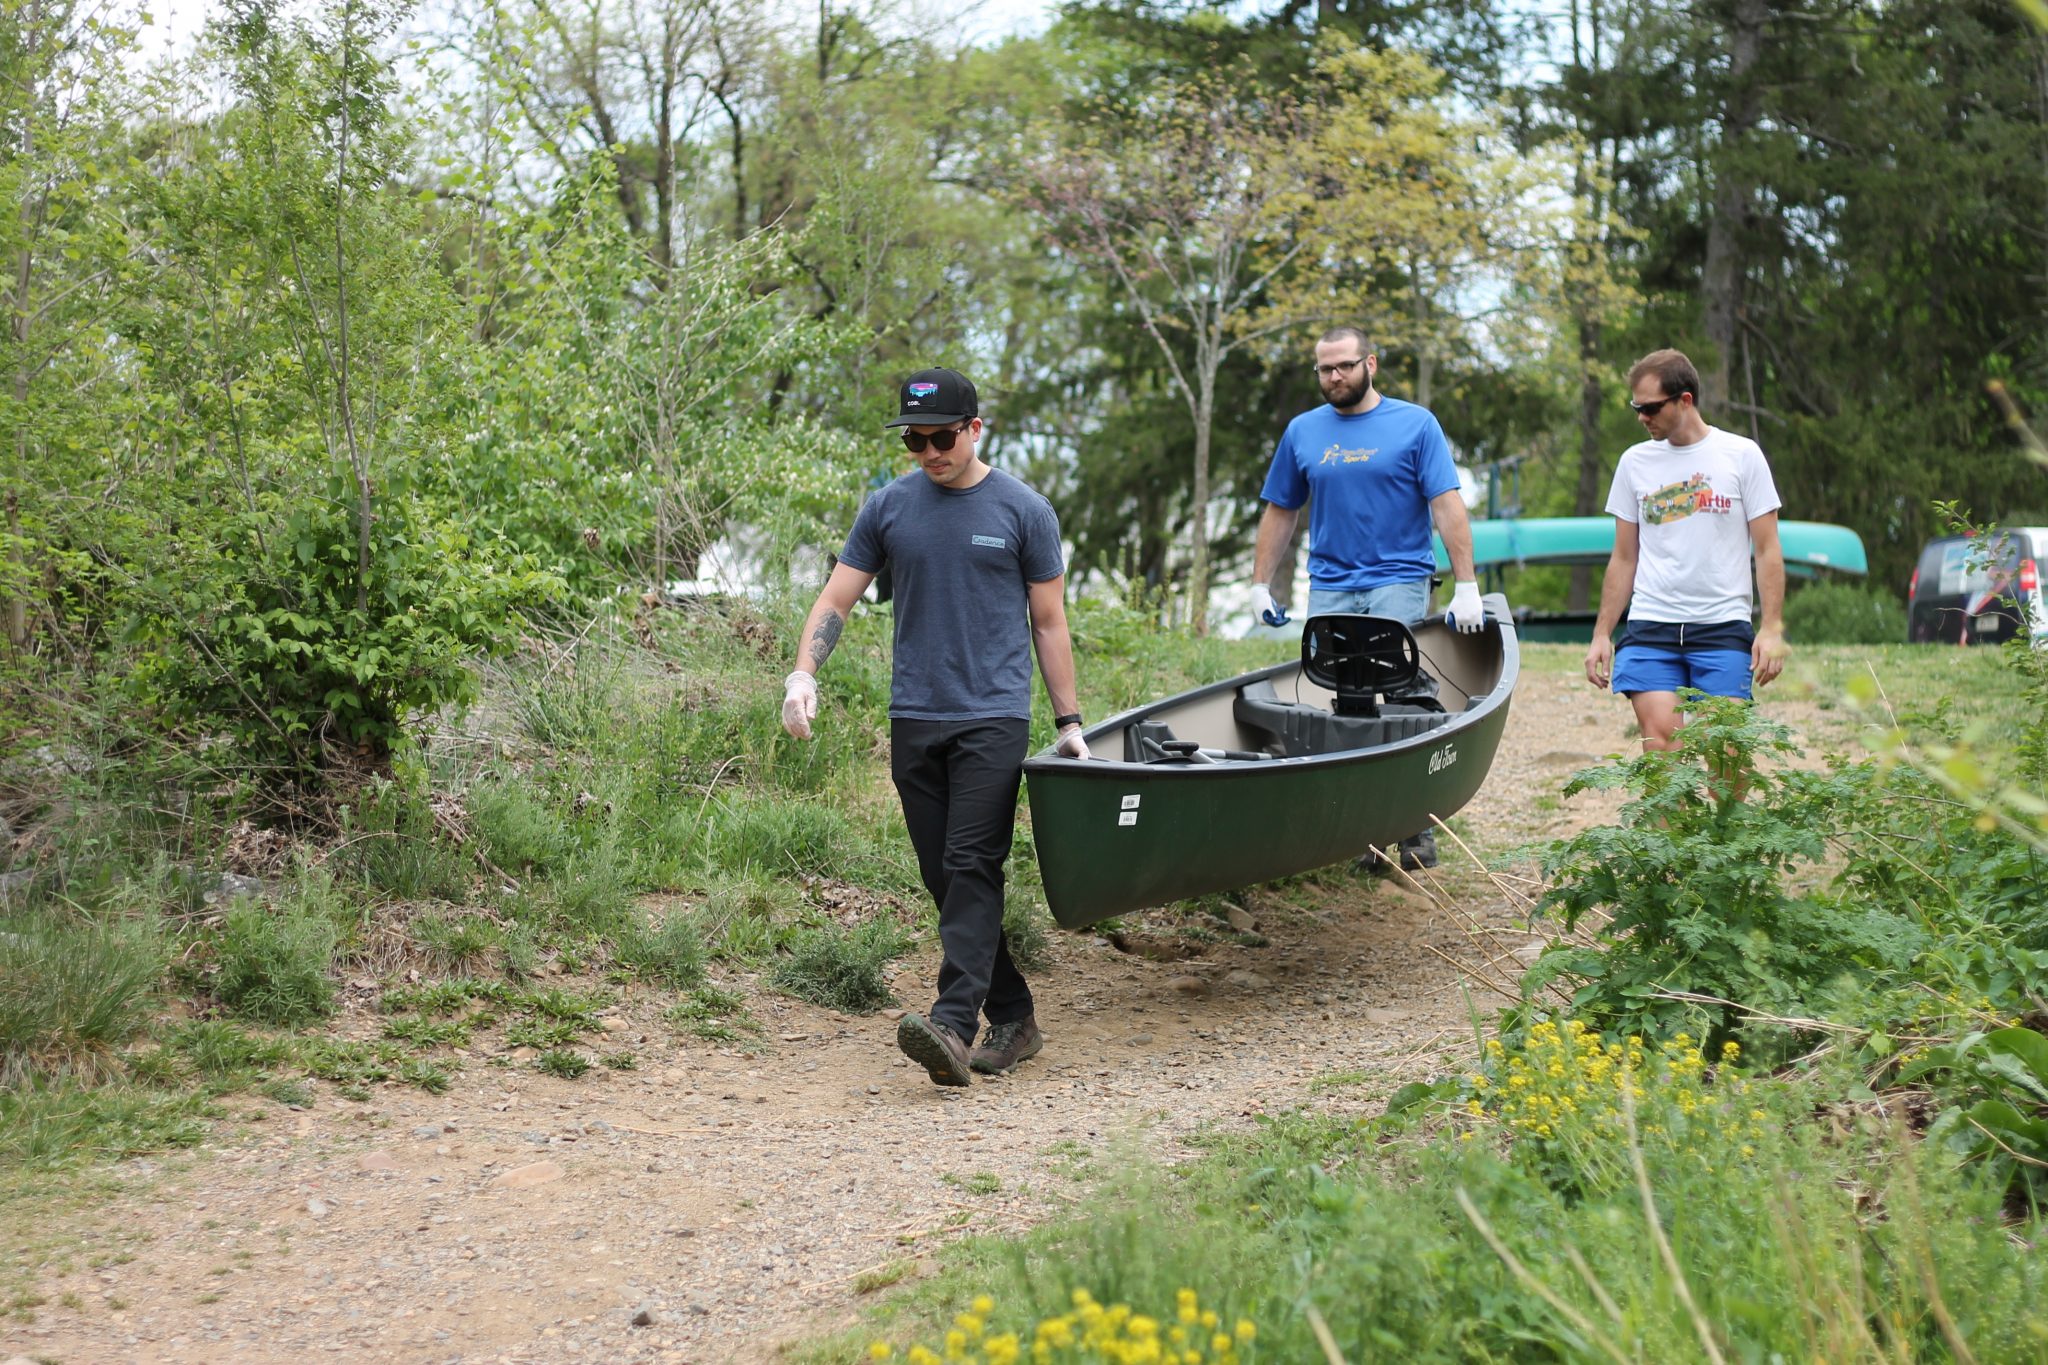 Volunteers from Carilion Clinic carry canoe to the river